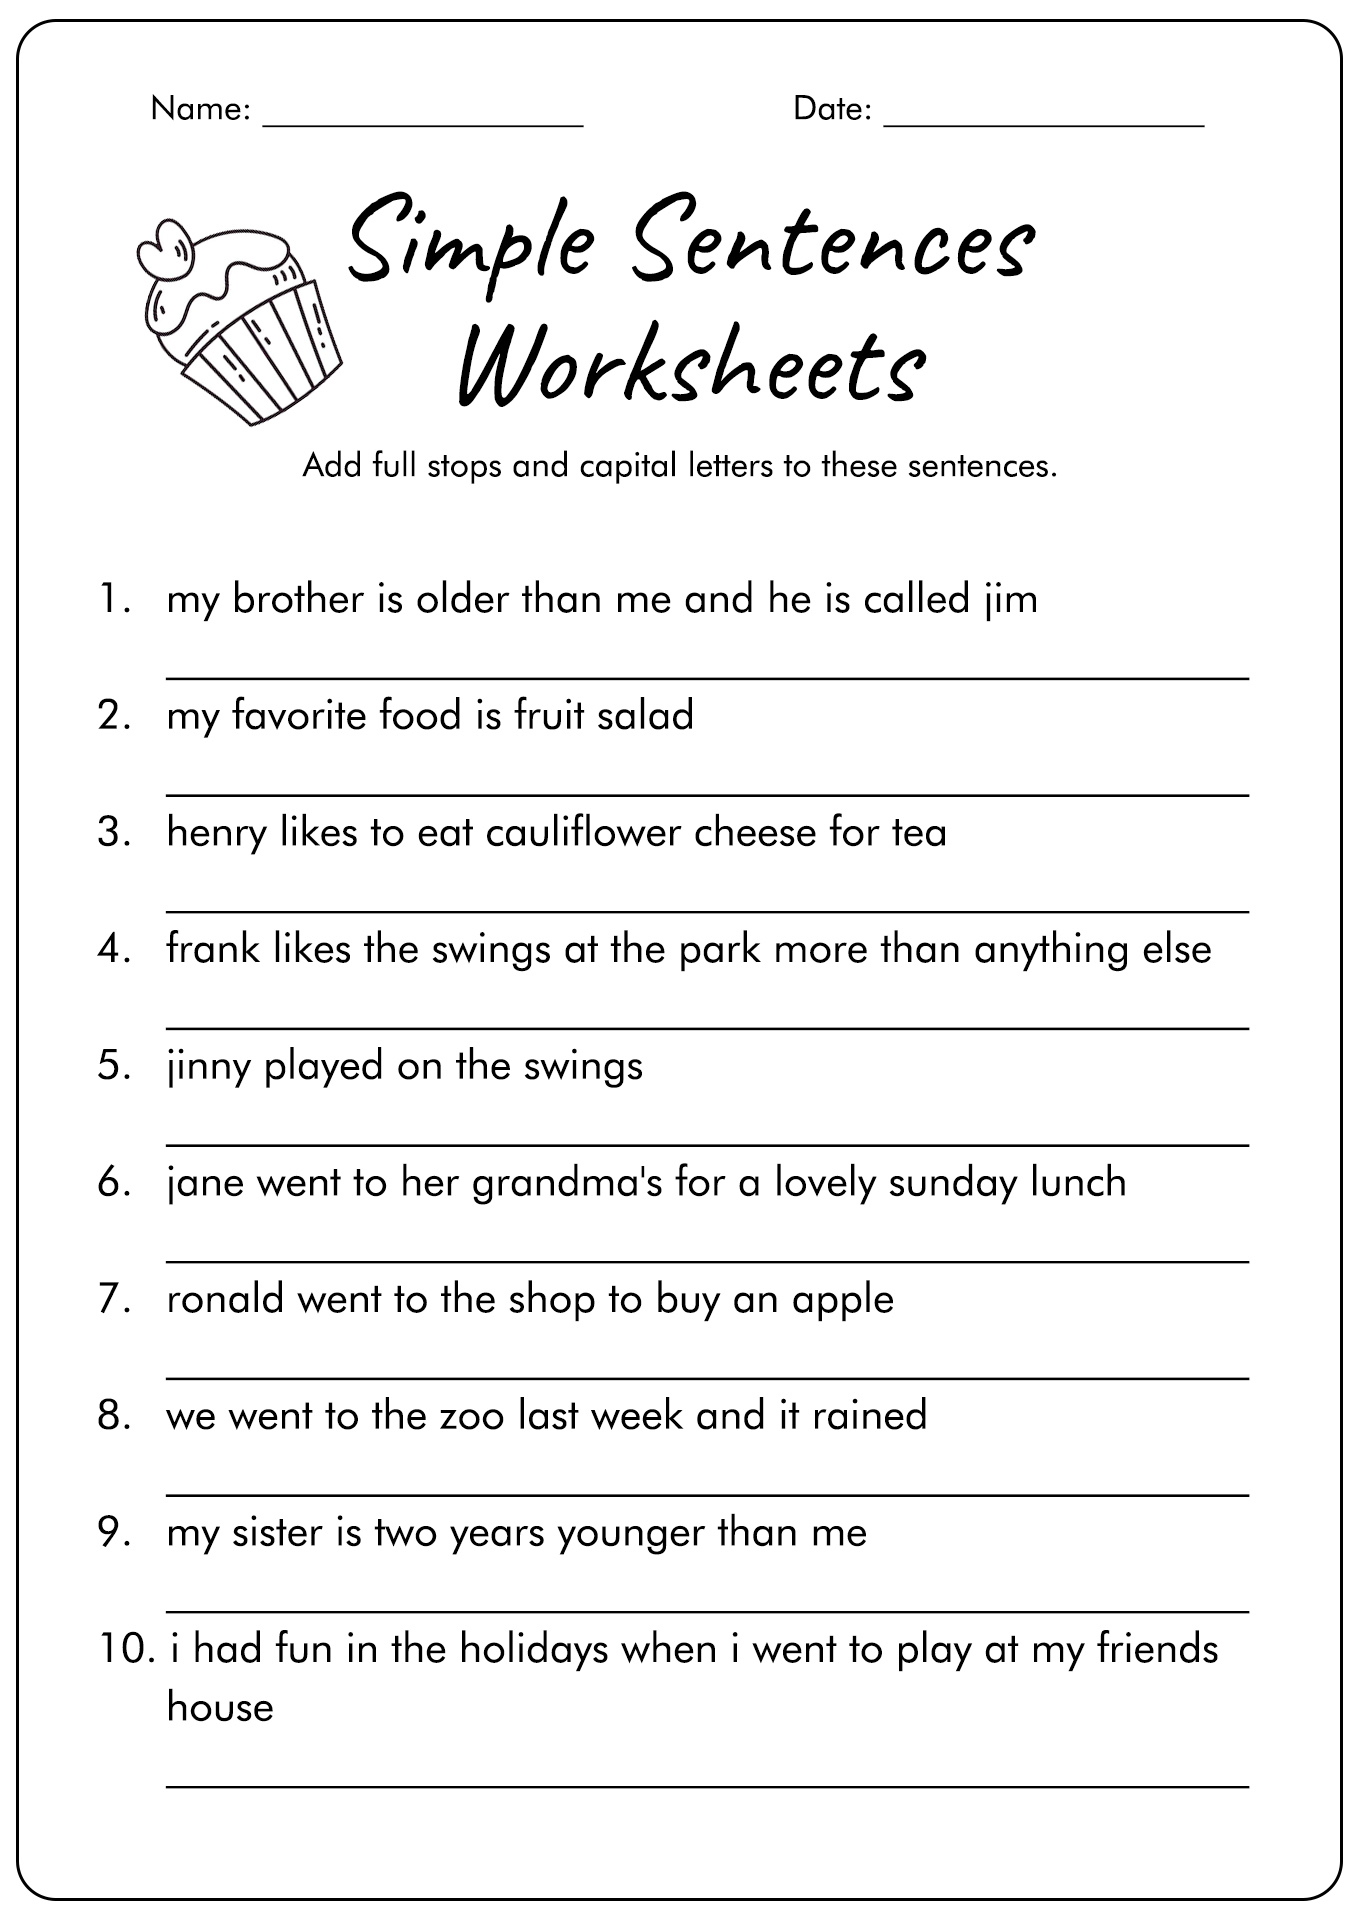 Practice Answering In Complete Sentences Worksheet For Adults